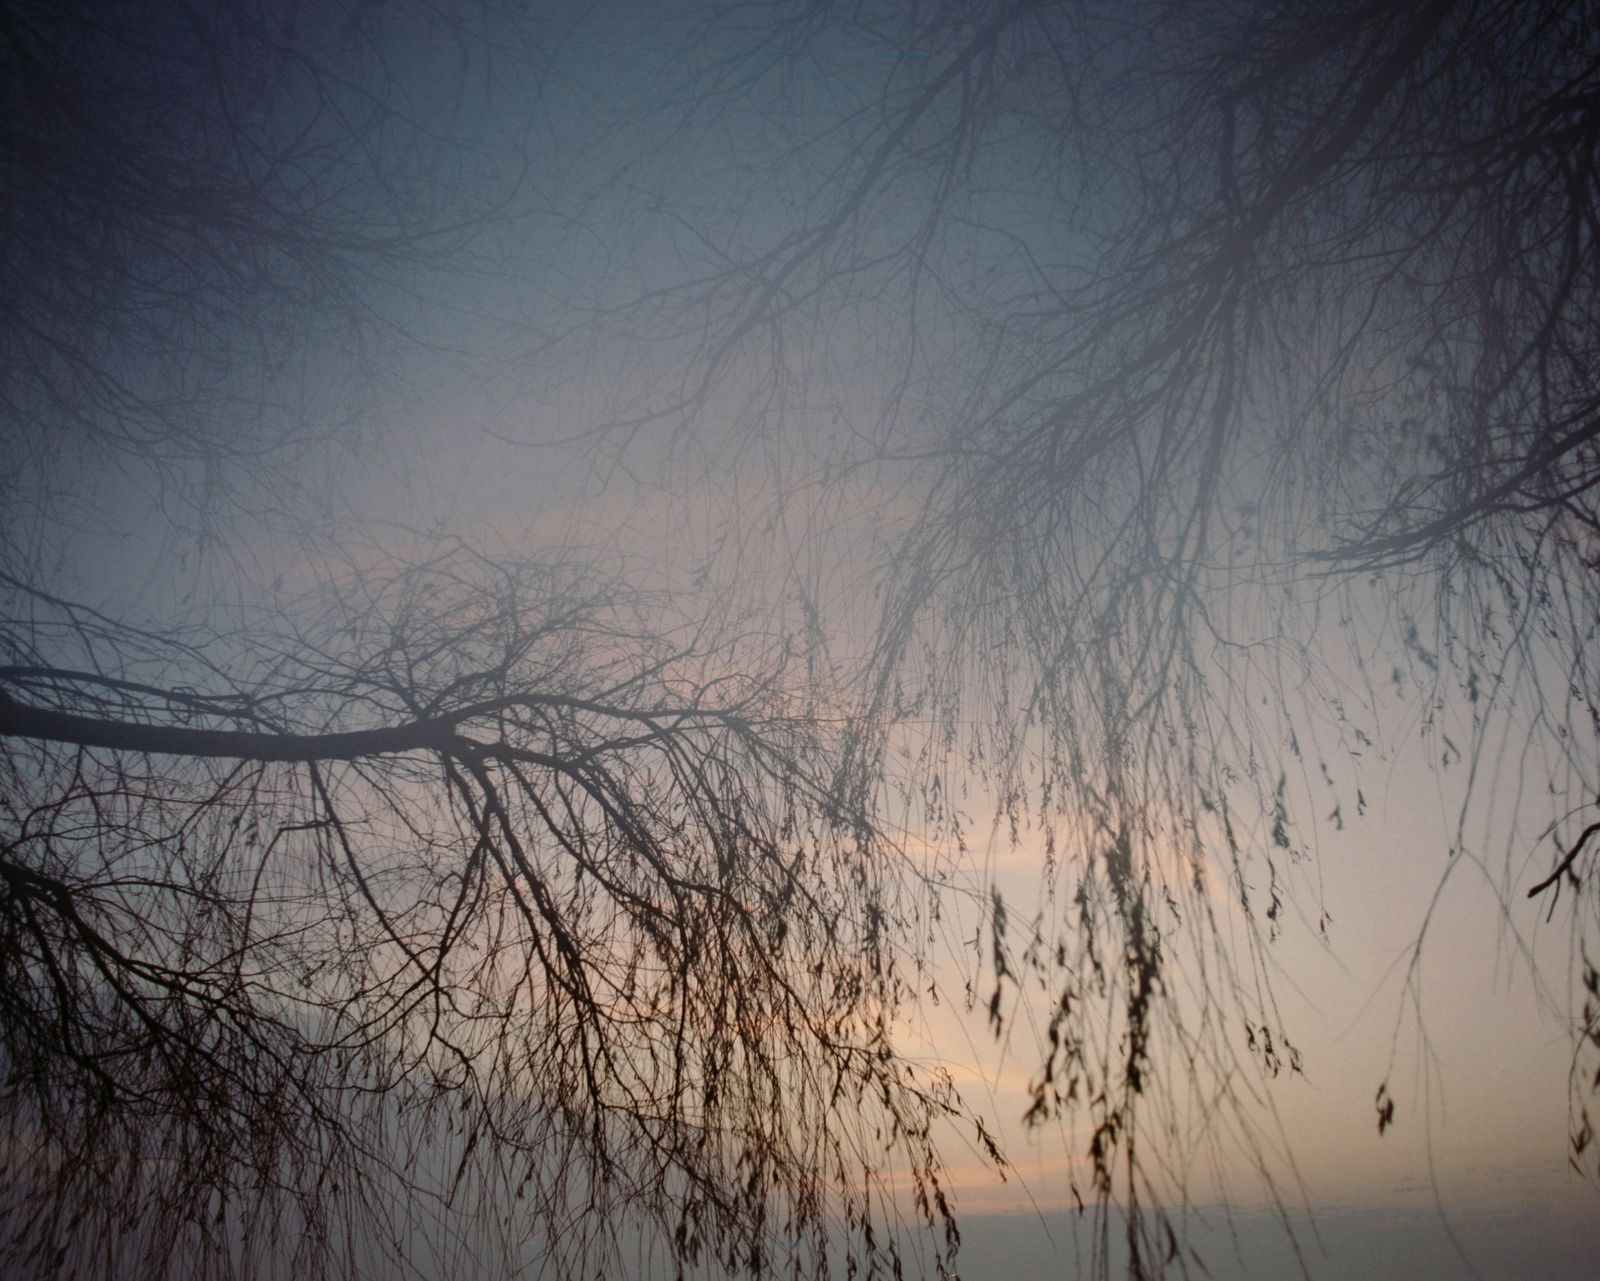 © Laima Arlauskaitė - Image from the What The Water Gave Us: Code Blue photography project